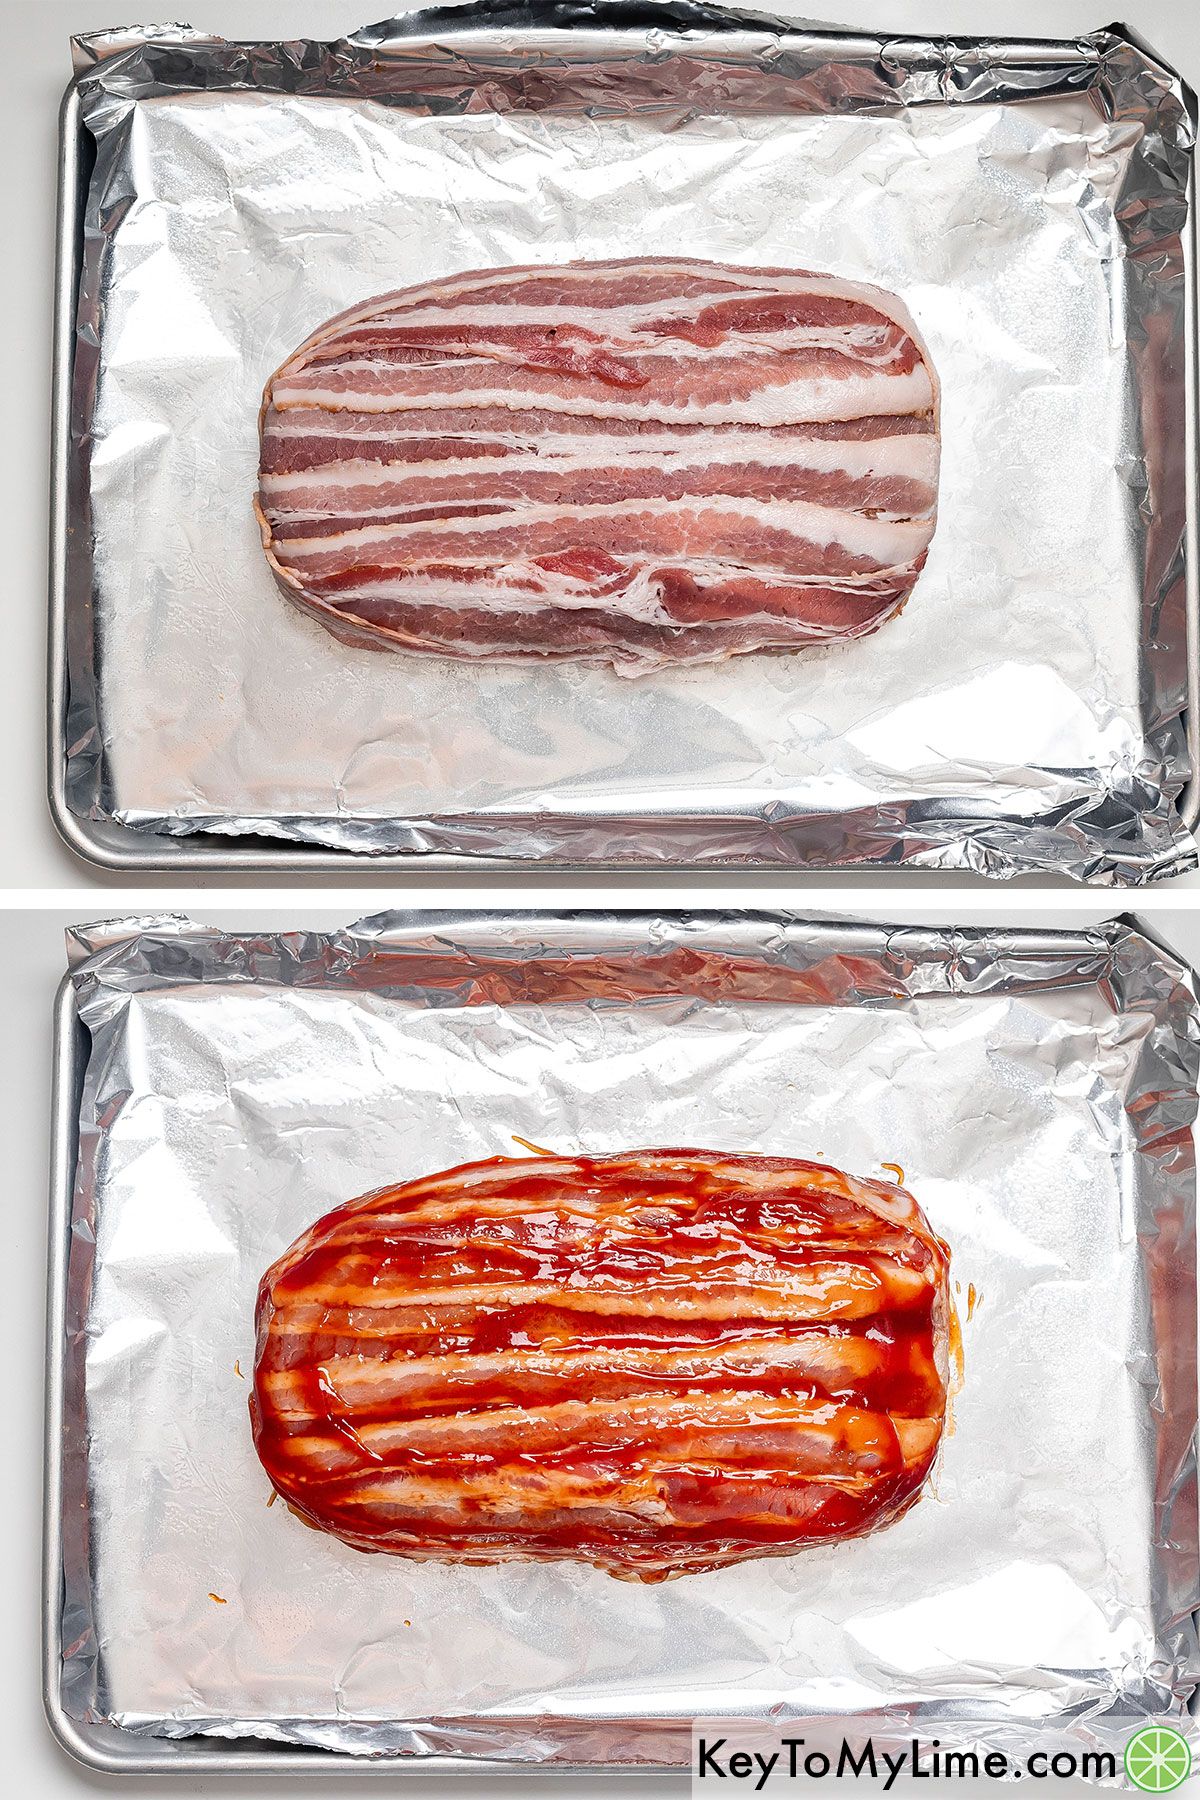 Covering the meatloaf with strips of bacon, then coating with the ketchup glaze before putting it in the oven.